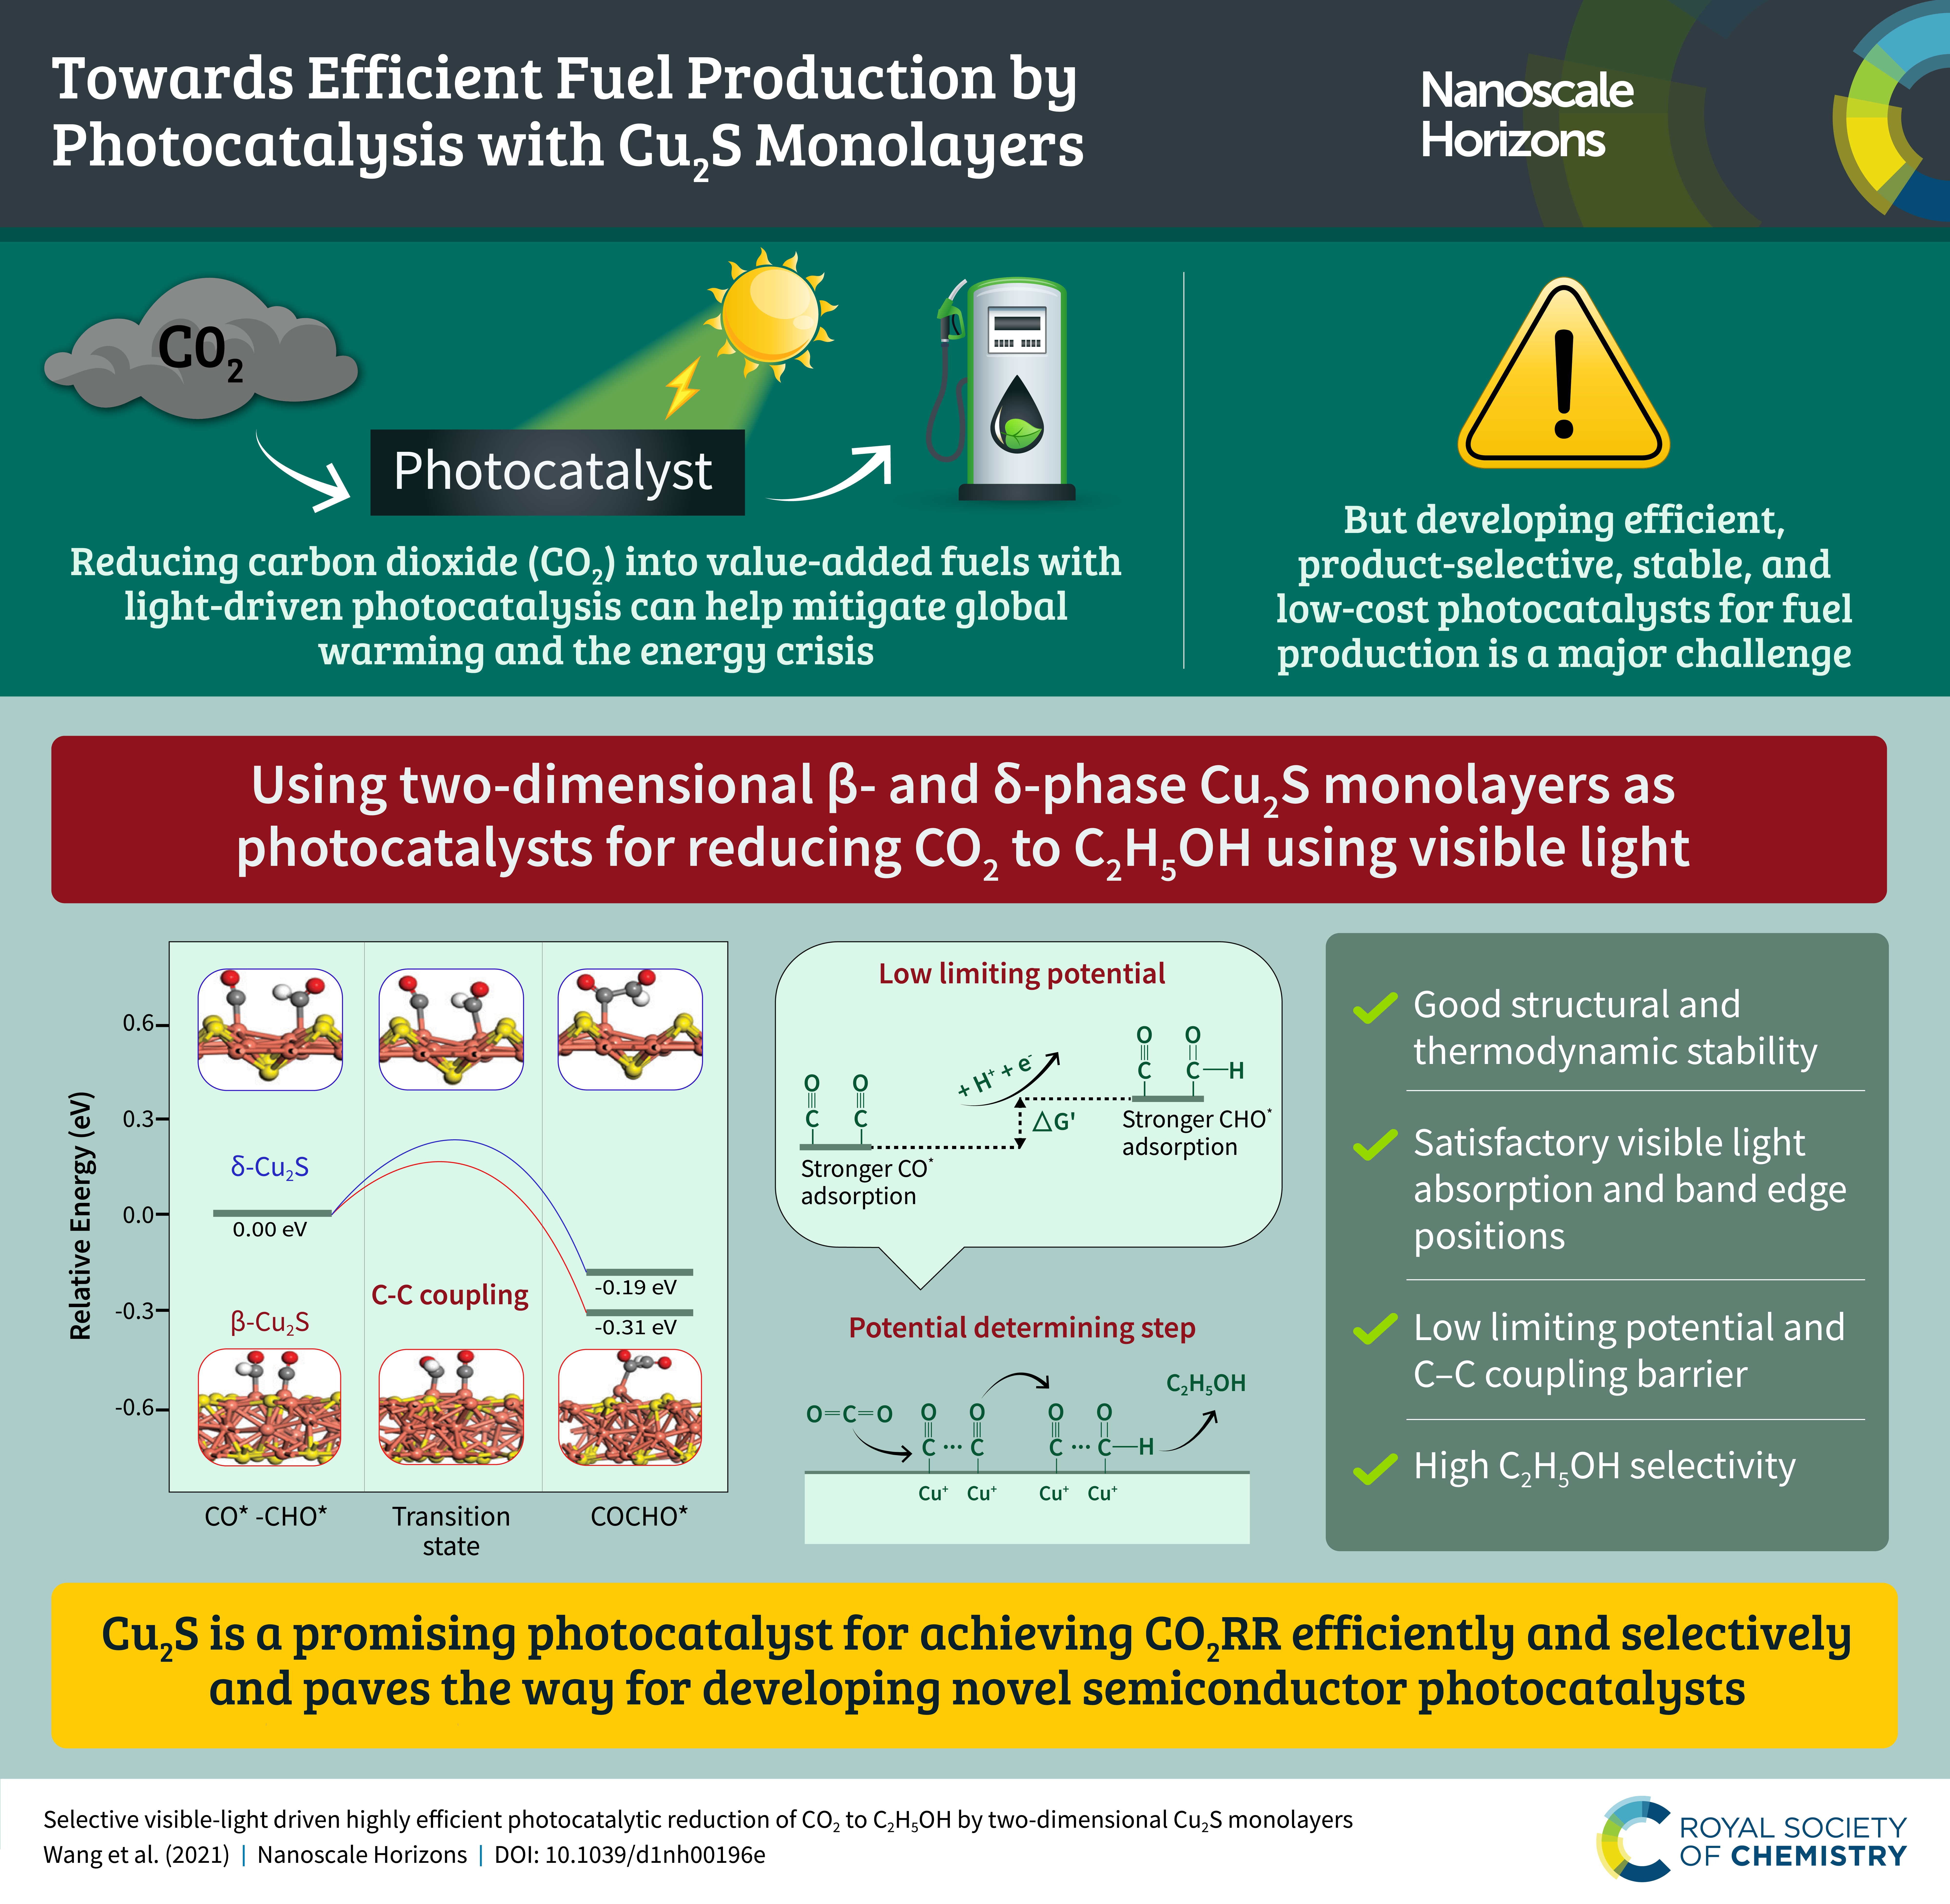 An infographic summarising the content of the article "Selective visible-light driven highly efficient photocatalytic reduction of CO2 to C2H5OH by two-dimensional Cu2S monolayers"